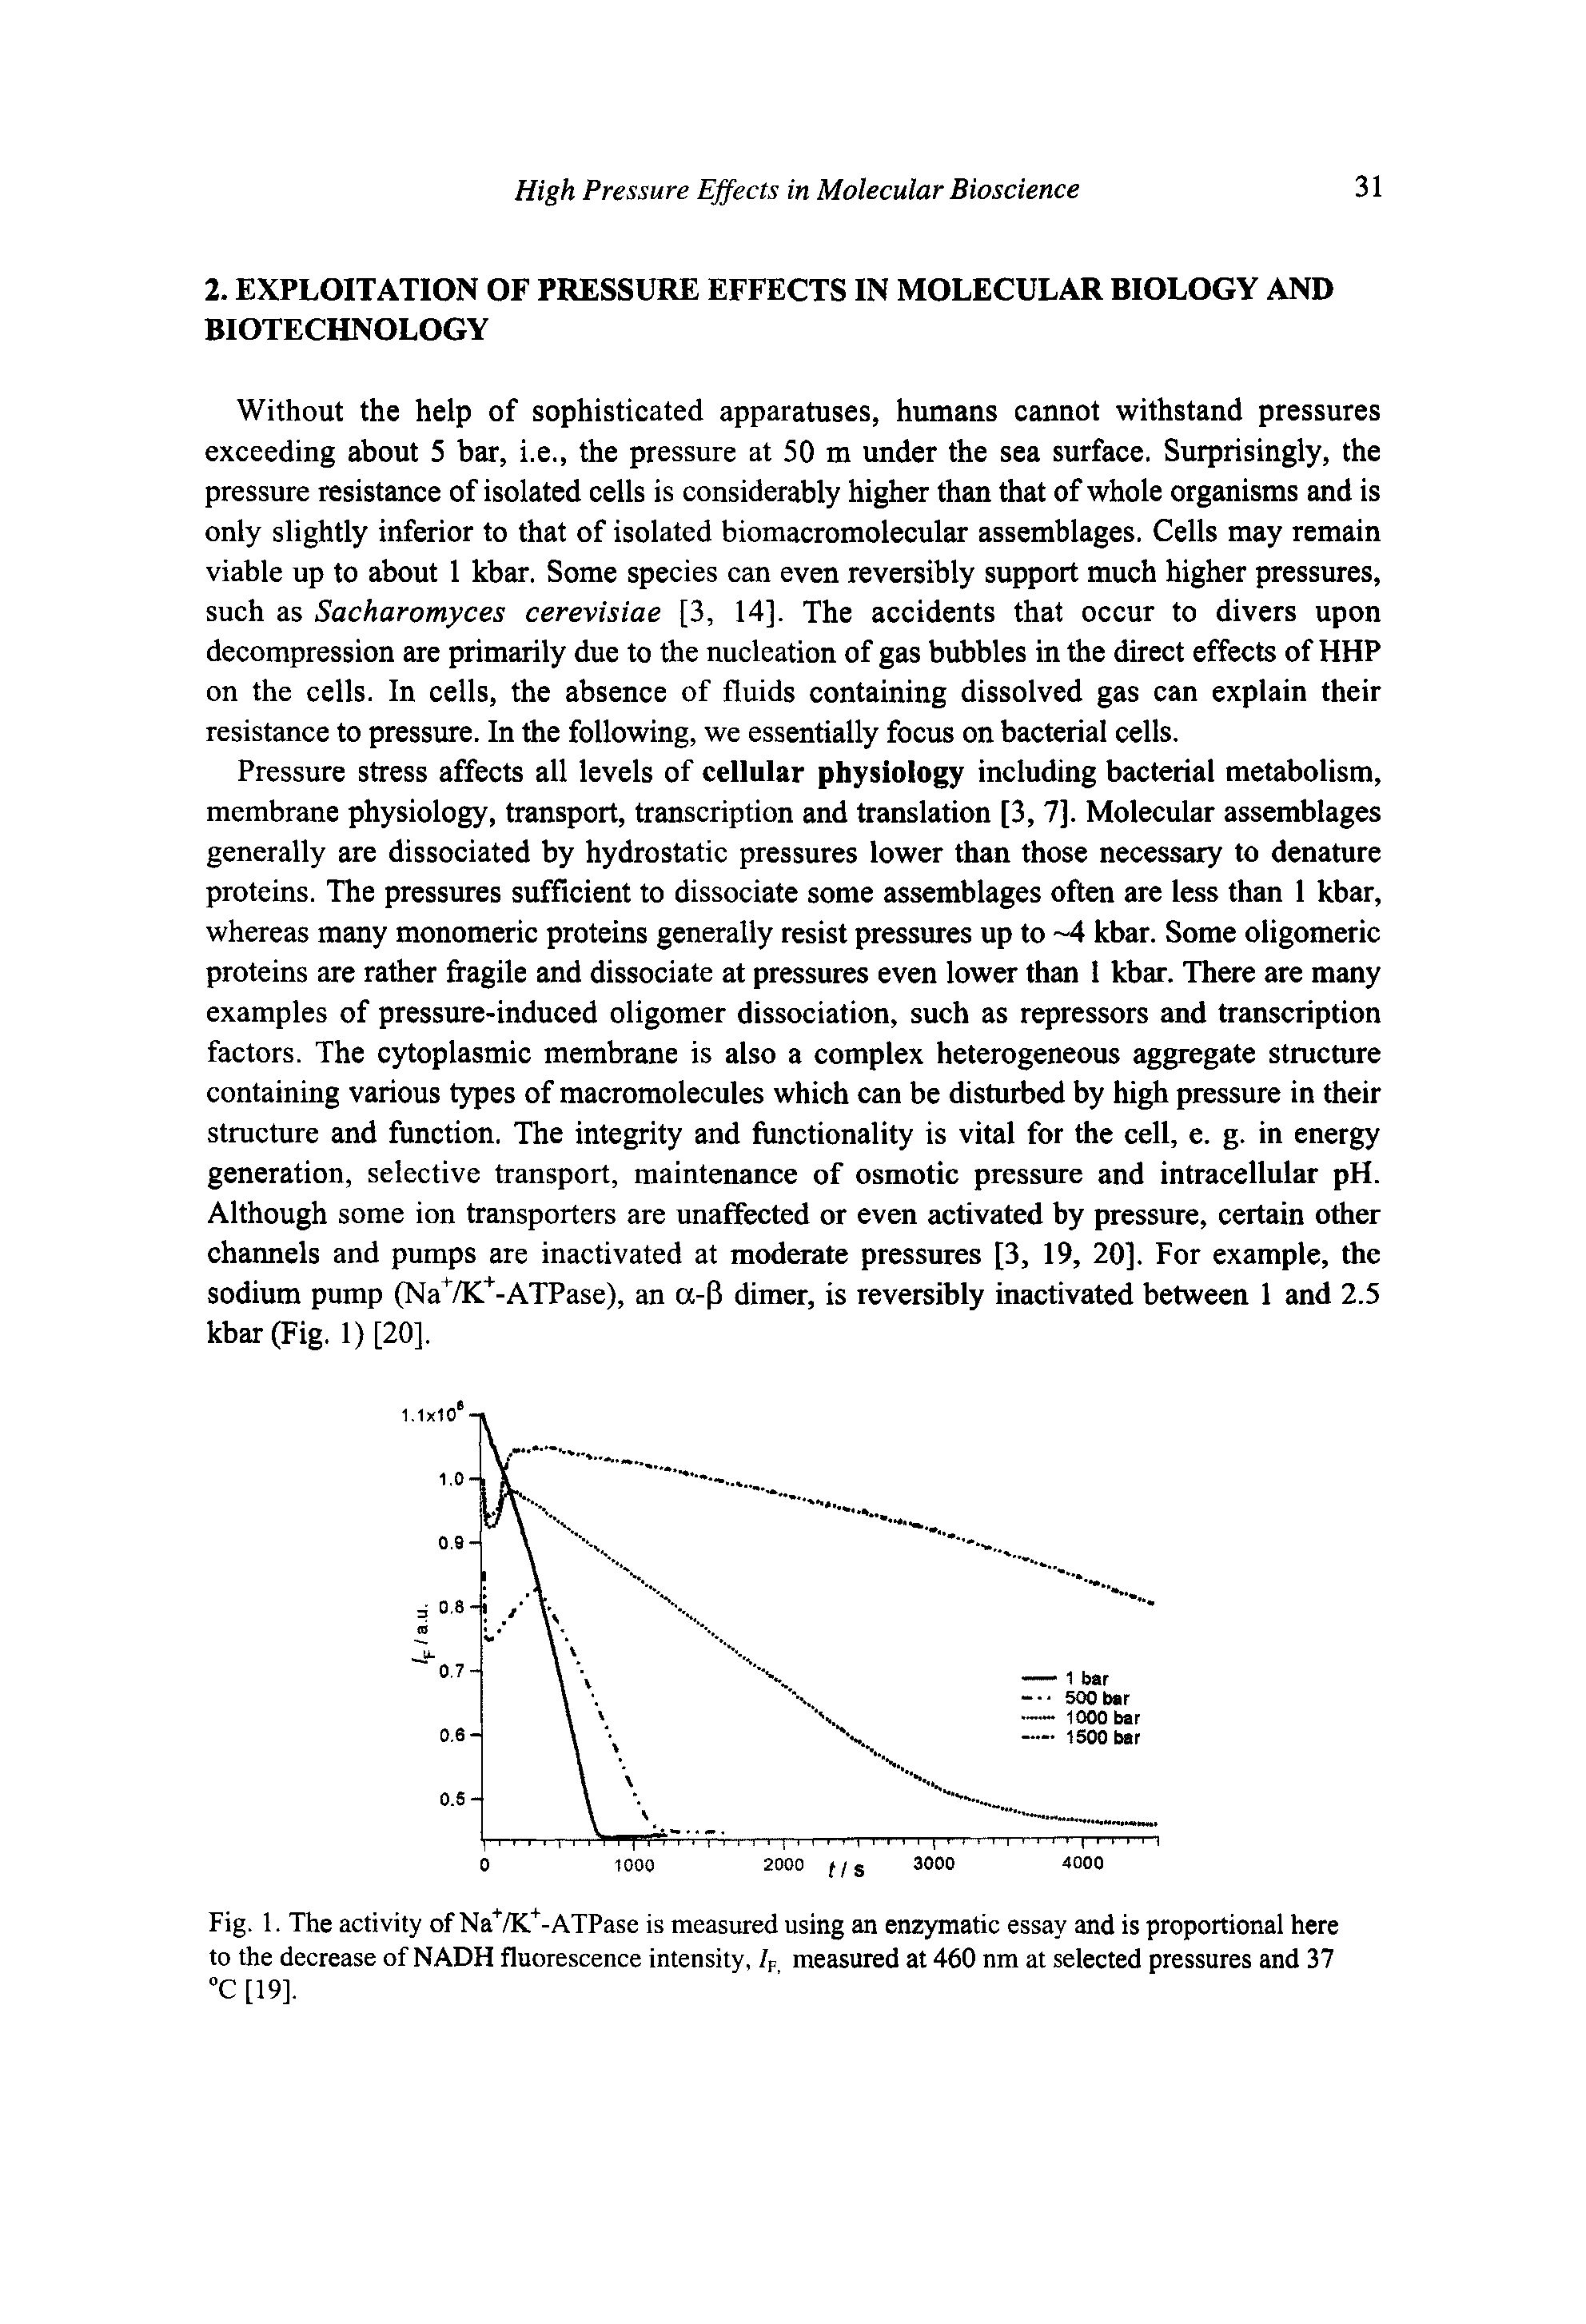 Fig. 1. The activity of Na /K -ATPase is measured using an enzymatic essay and is proportional here to the decrease of NADH fluorescence intensity, If measured at 460 nm at selected pressures and 37 C [19].